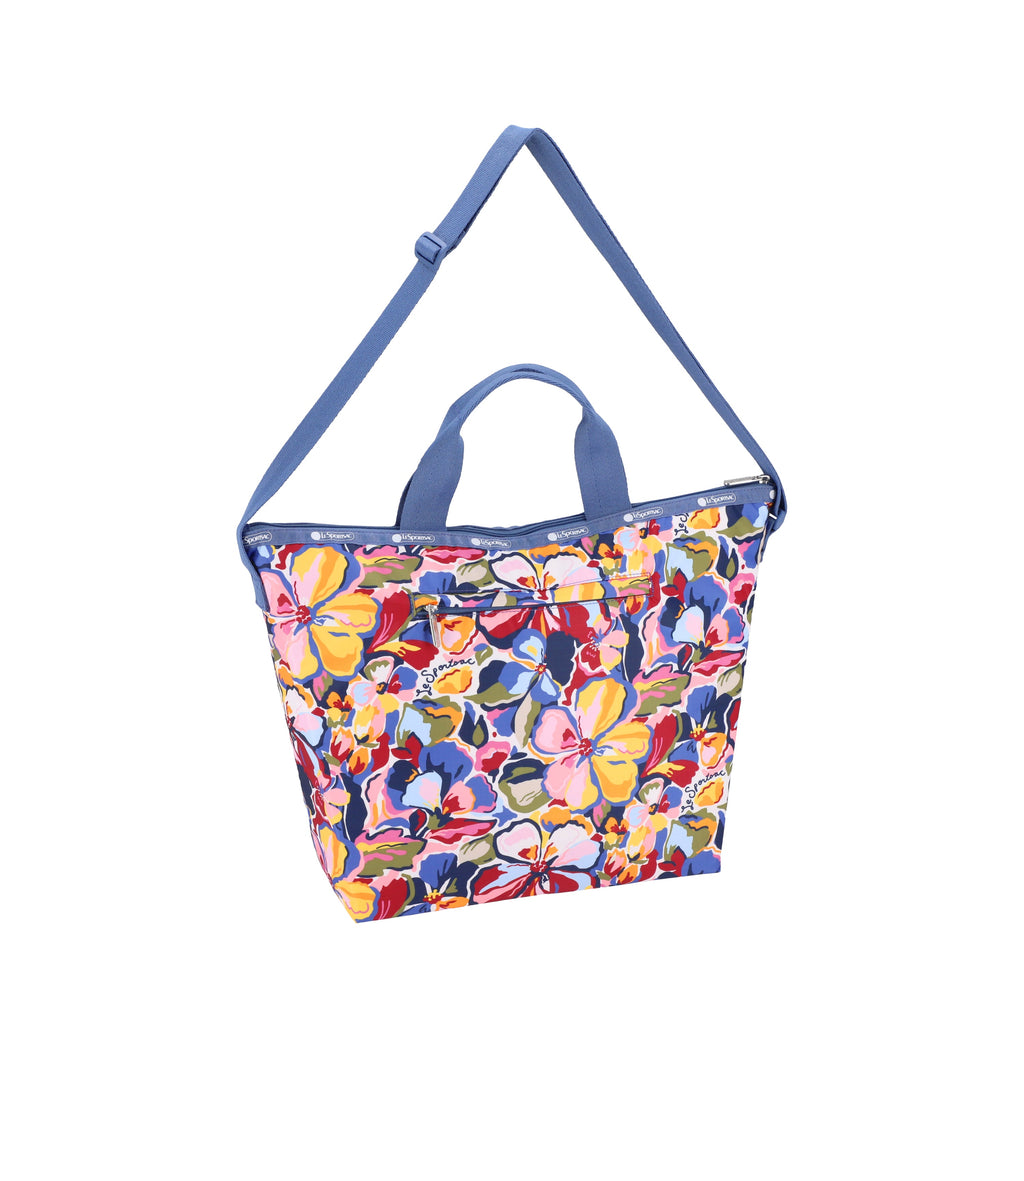 Lesportsac Deluxe Easy Carry Tote - Autumn Floral Print